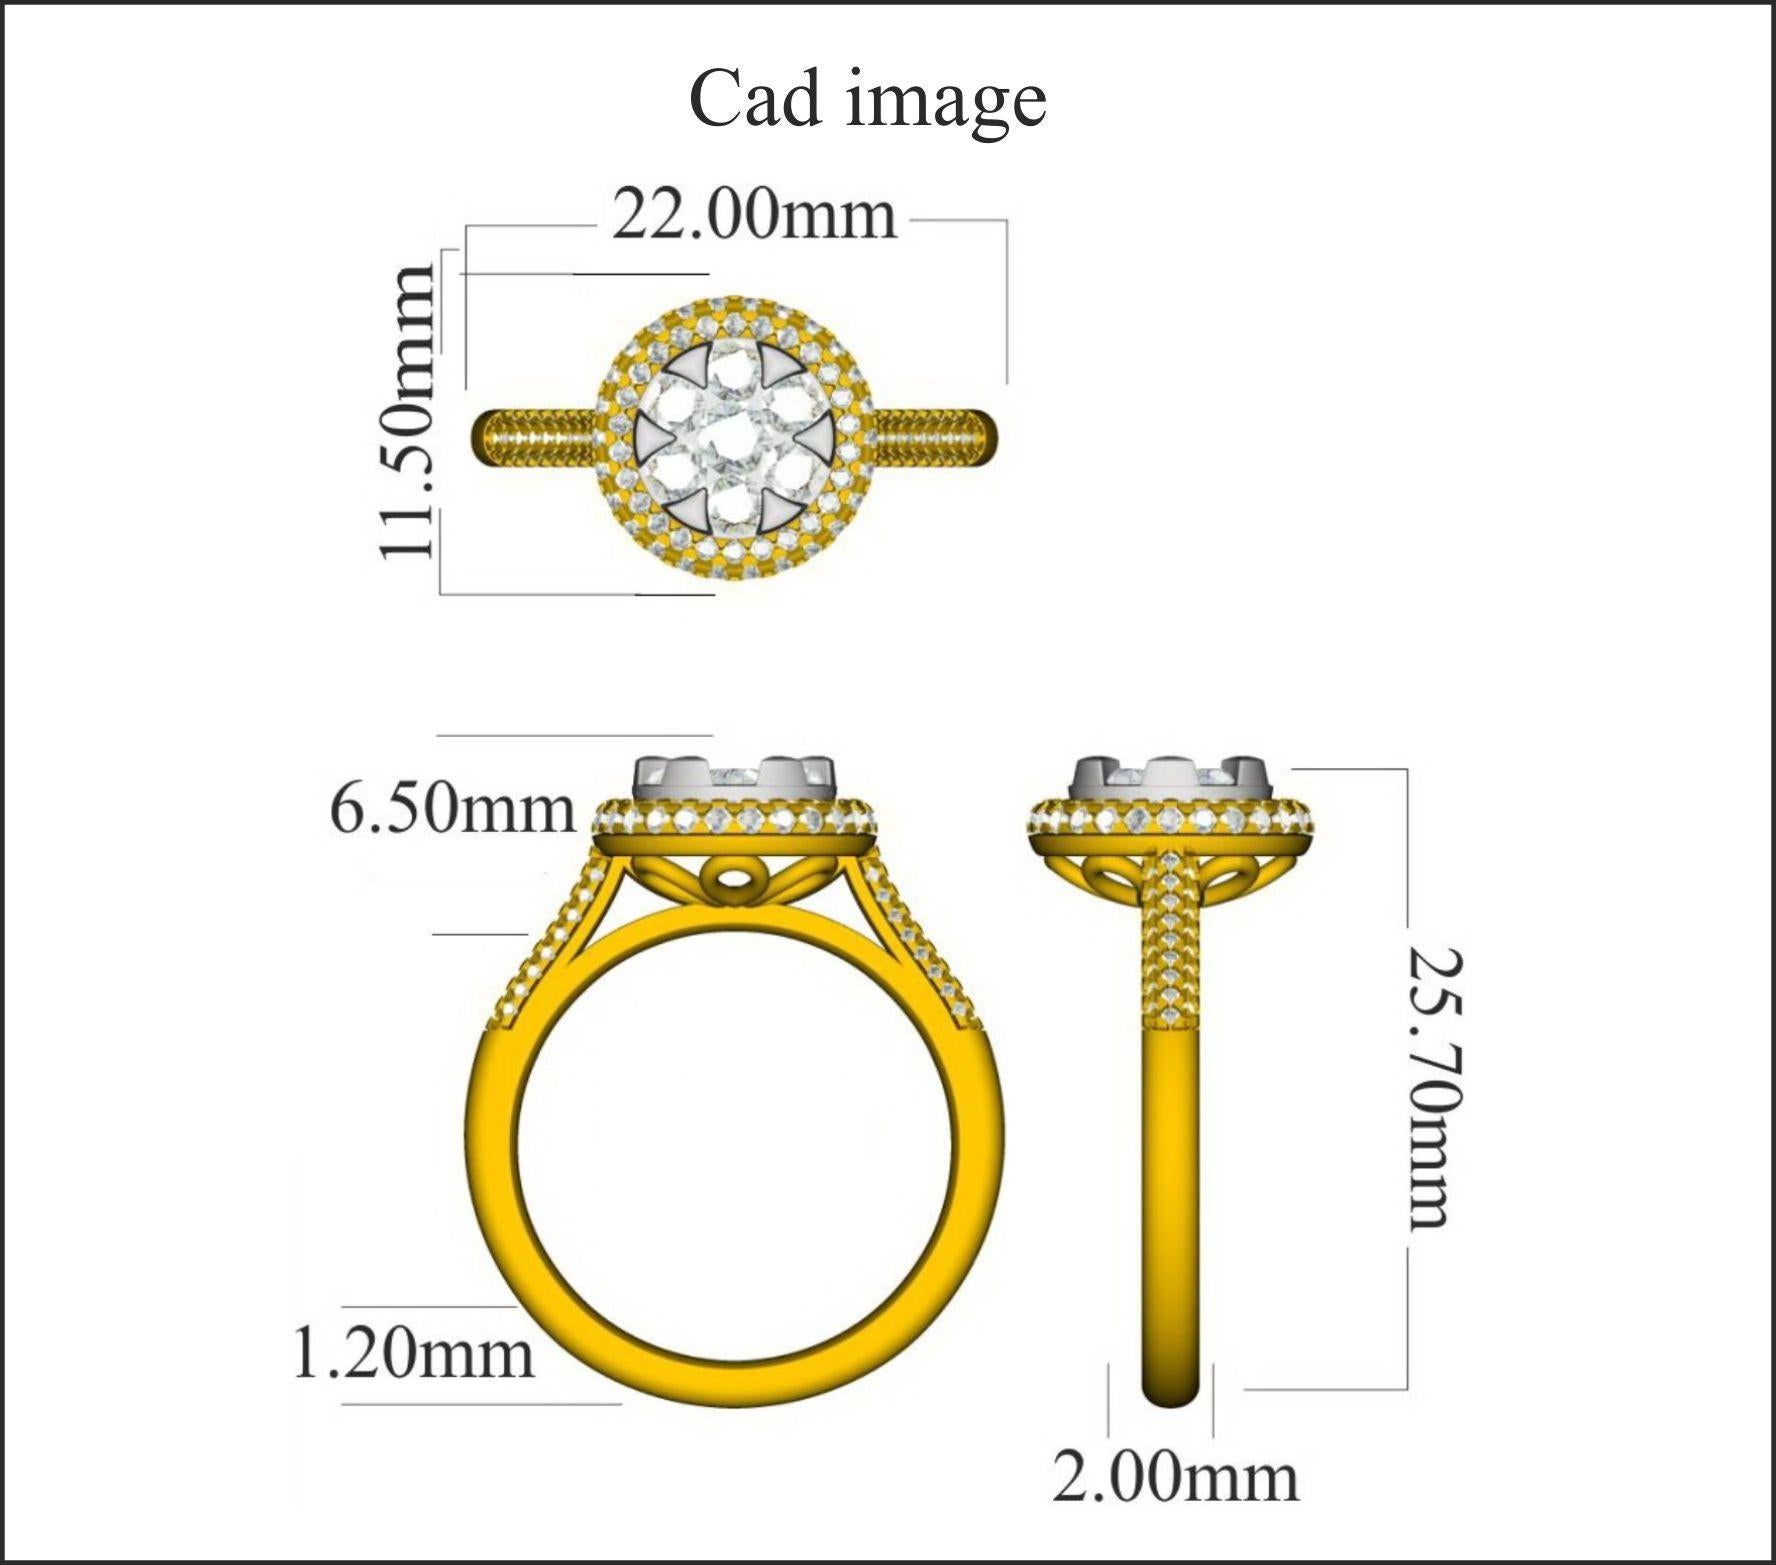 This Diamond Frame Band Ring is expertly crafted in 14 Karat Yellow Gold and features 109 Round cut White diamonds set in micro-pave, prong and pressure setting, H-I color I2 clarity. This ring has high polish finish and is a valuable addition to